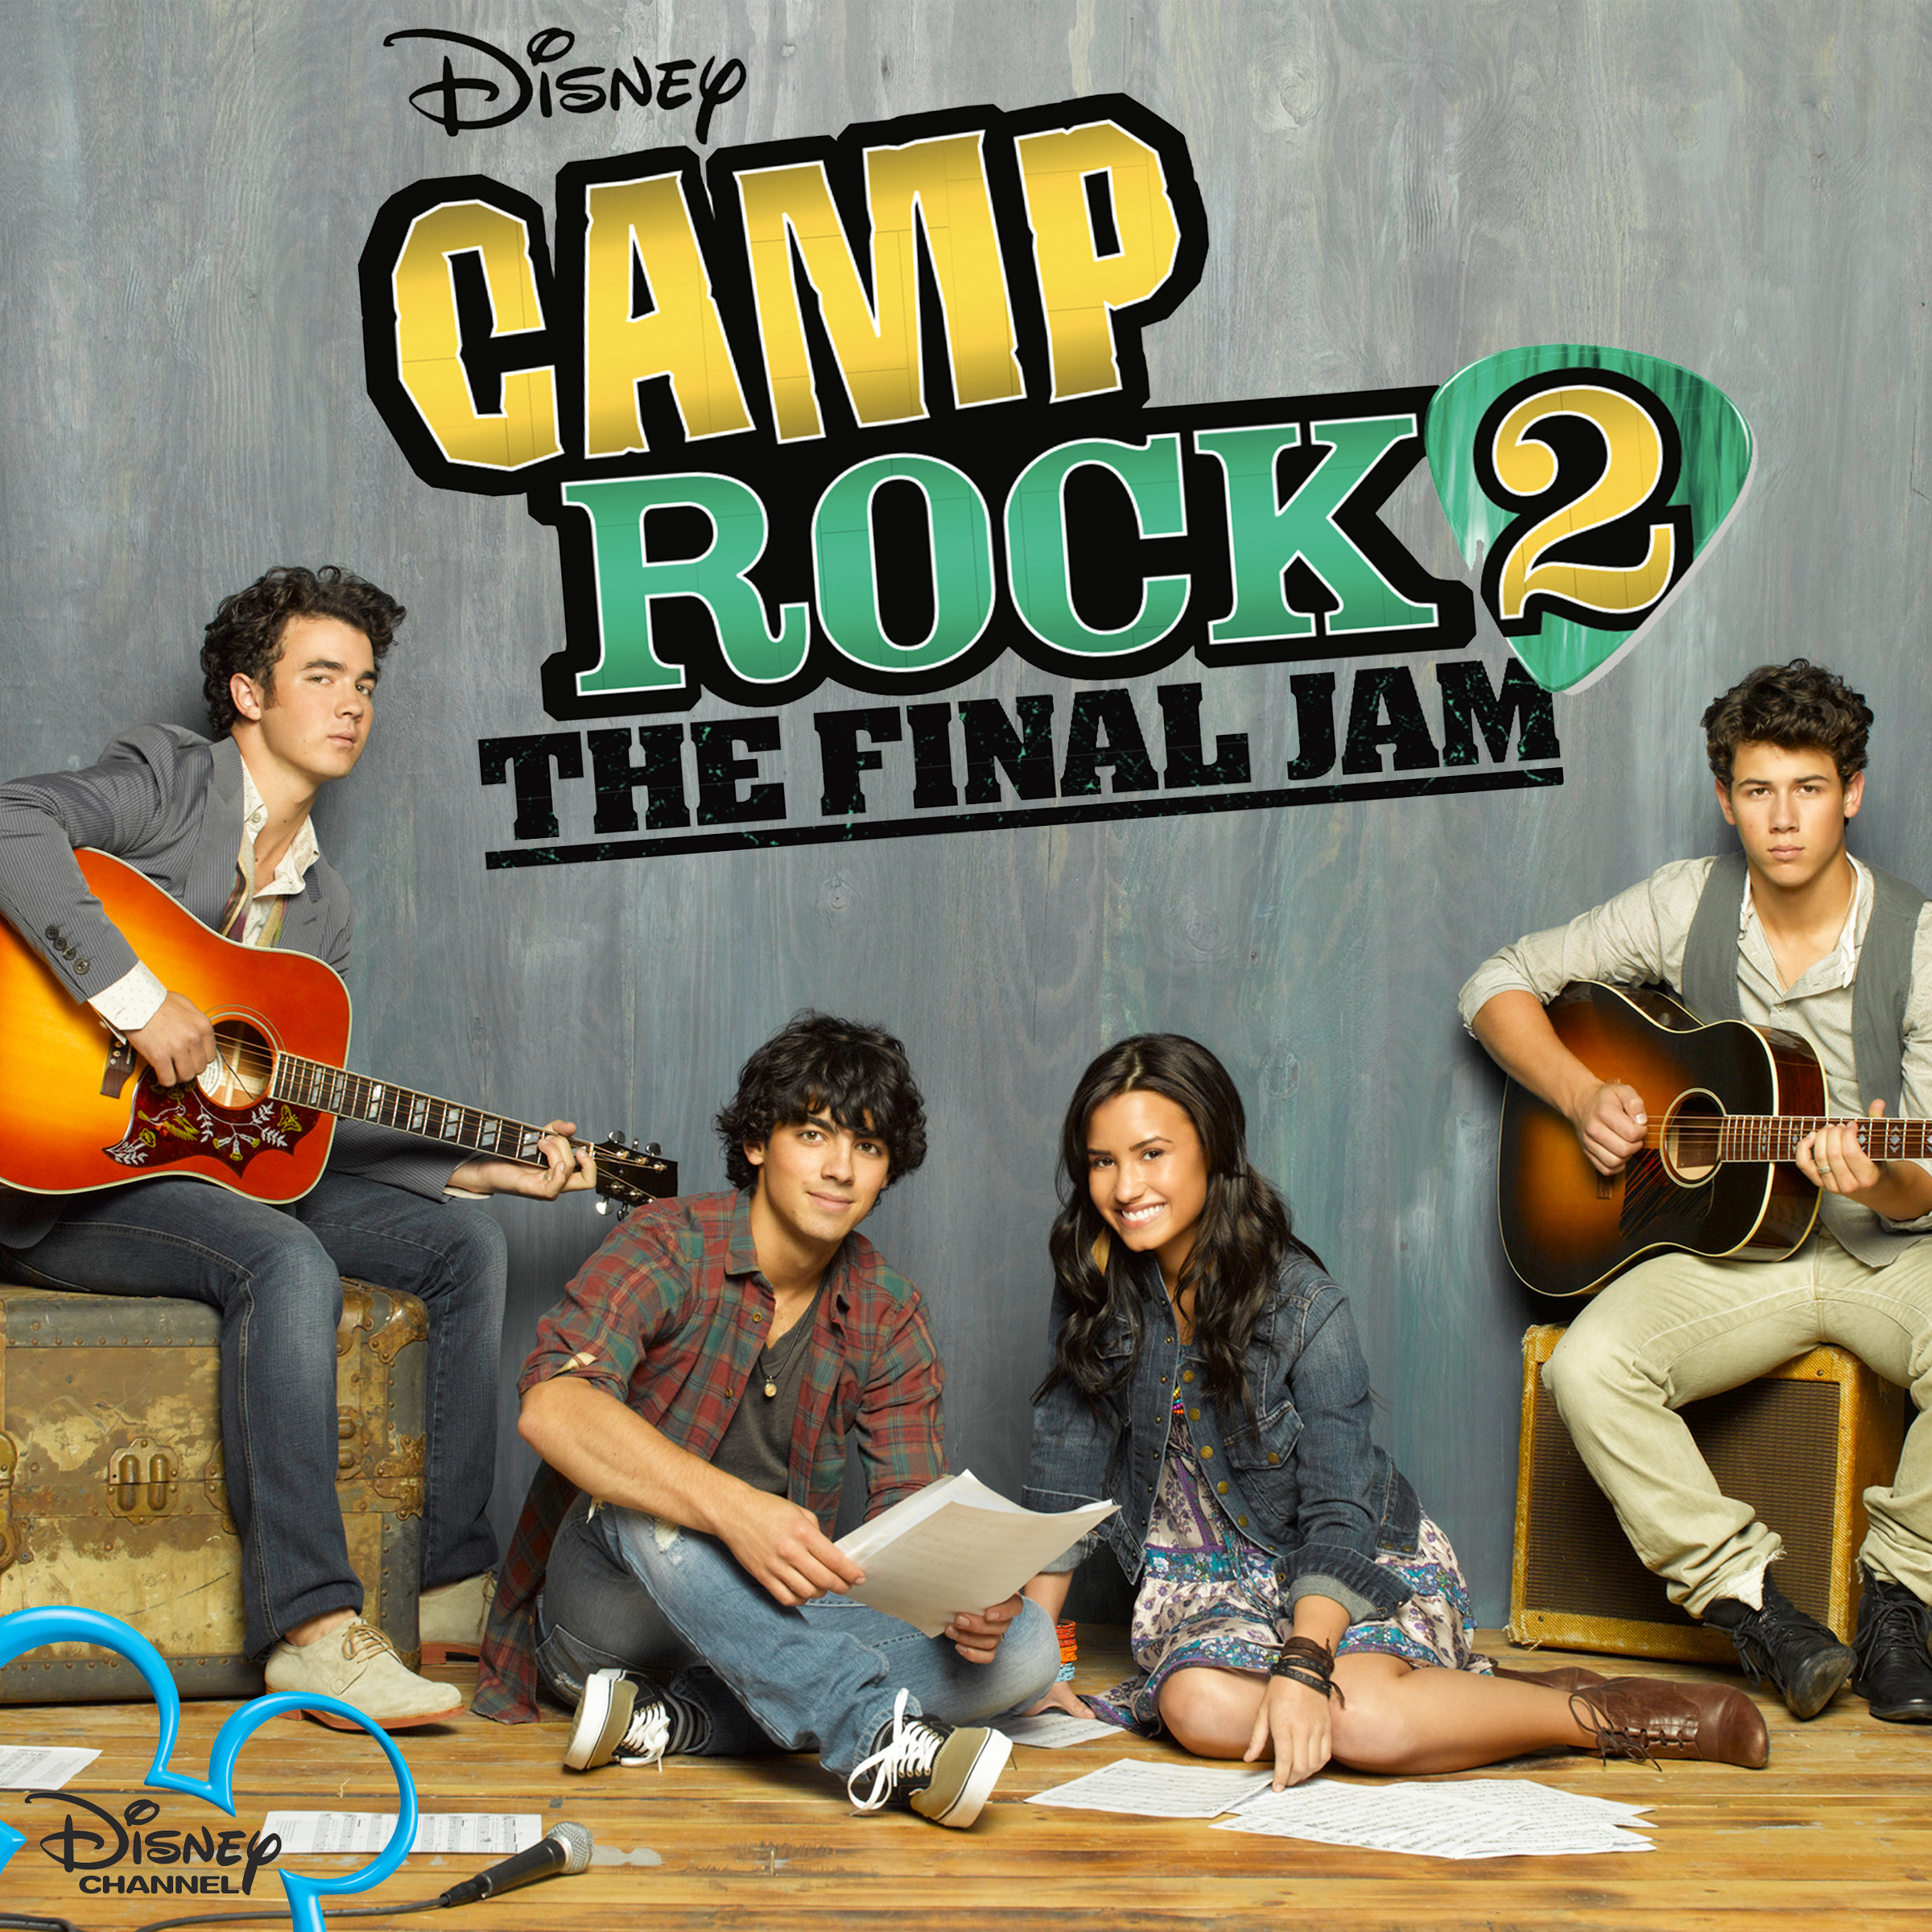 song from camp rock 2